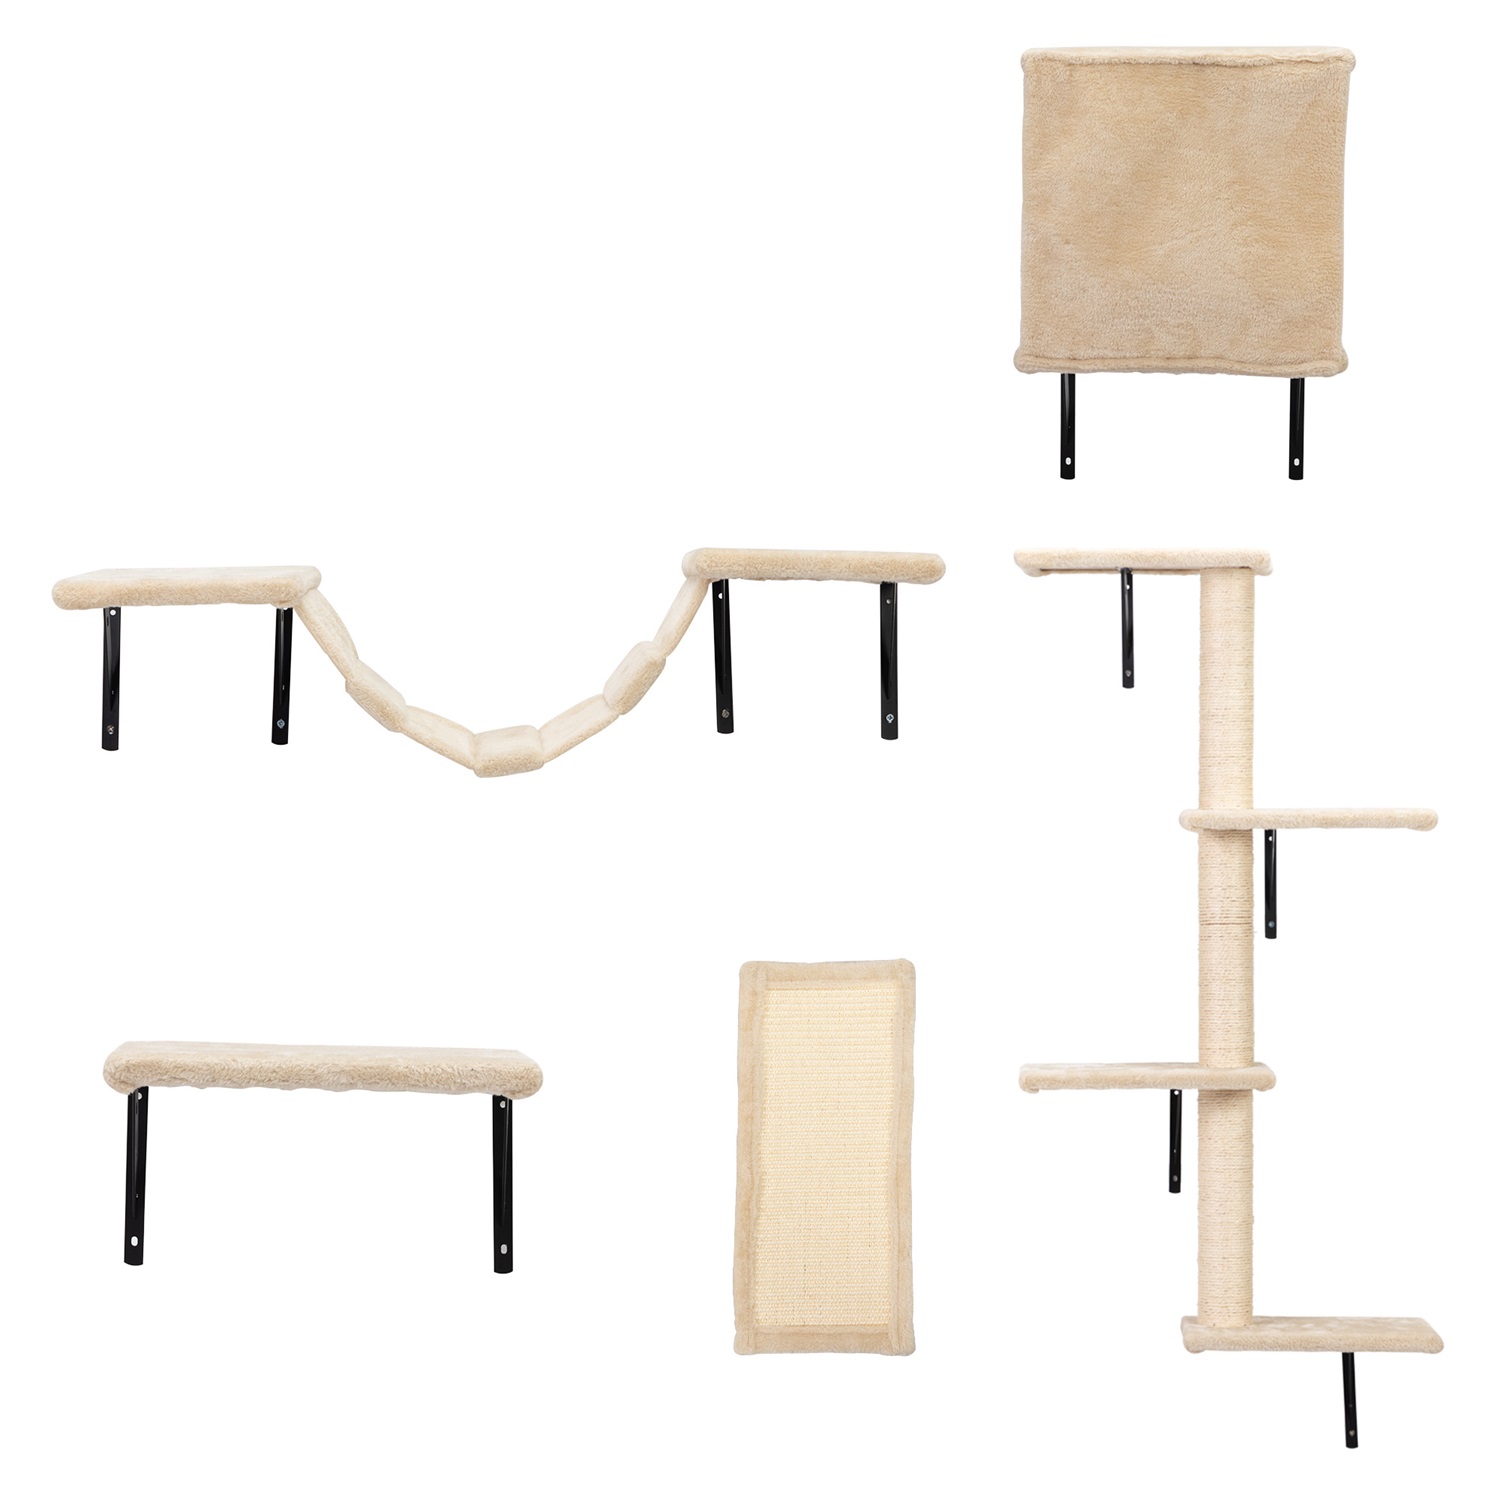 Pefilos Cat Wall Shelves and Perches Set of 5, Sleeping Playing Lounging Climbing  Cat Tree House for Multiple Cats, Beige